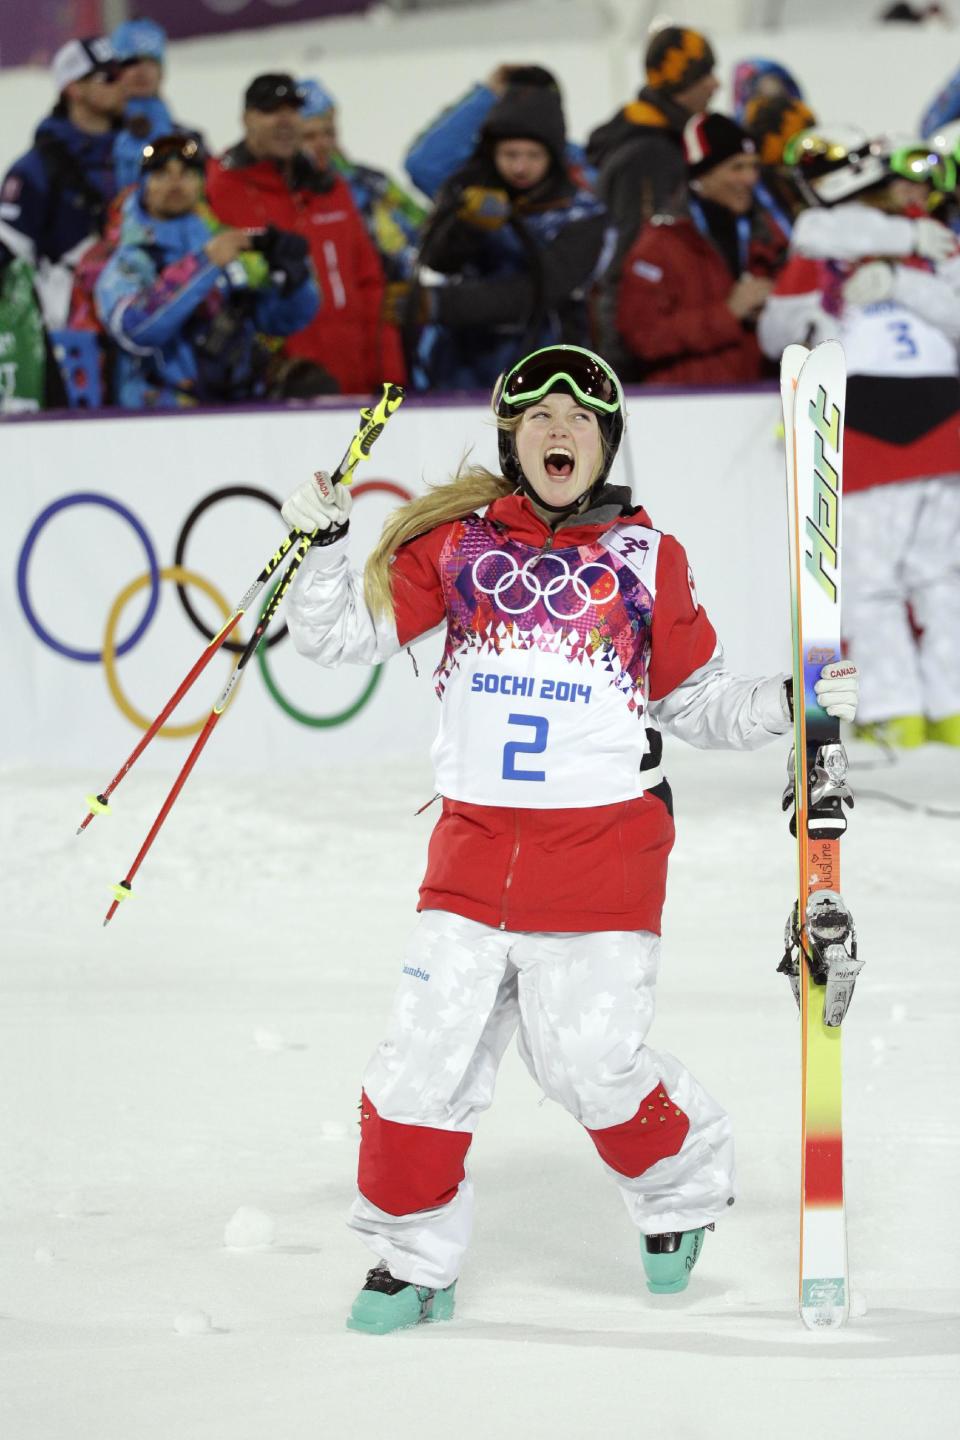 Canada's Justine Dufour-Lapointe celebrates after winning the gold medal final in the women's moguls at the 2014 Winter Olympics, Saturday, Feb. 8, 2014, in Krasnaya Polyana, Russia. (AP Photo/Jae C. Hong)